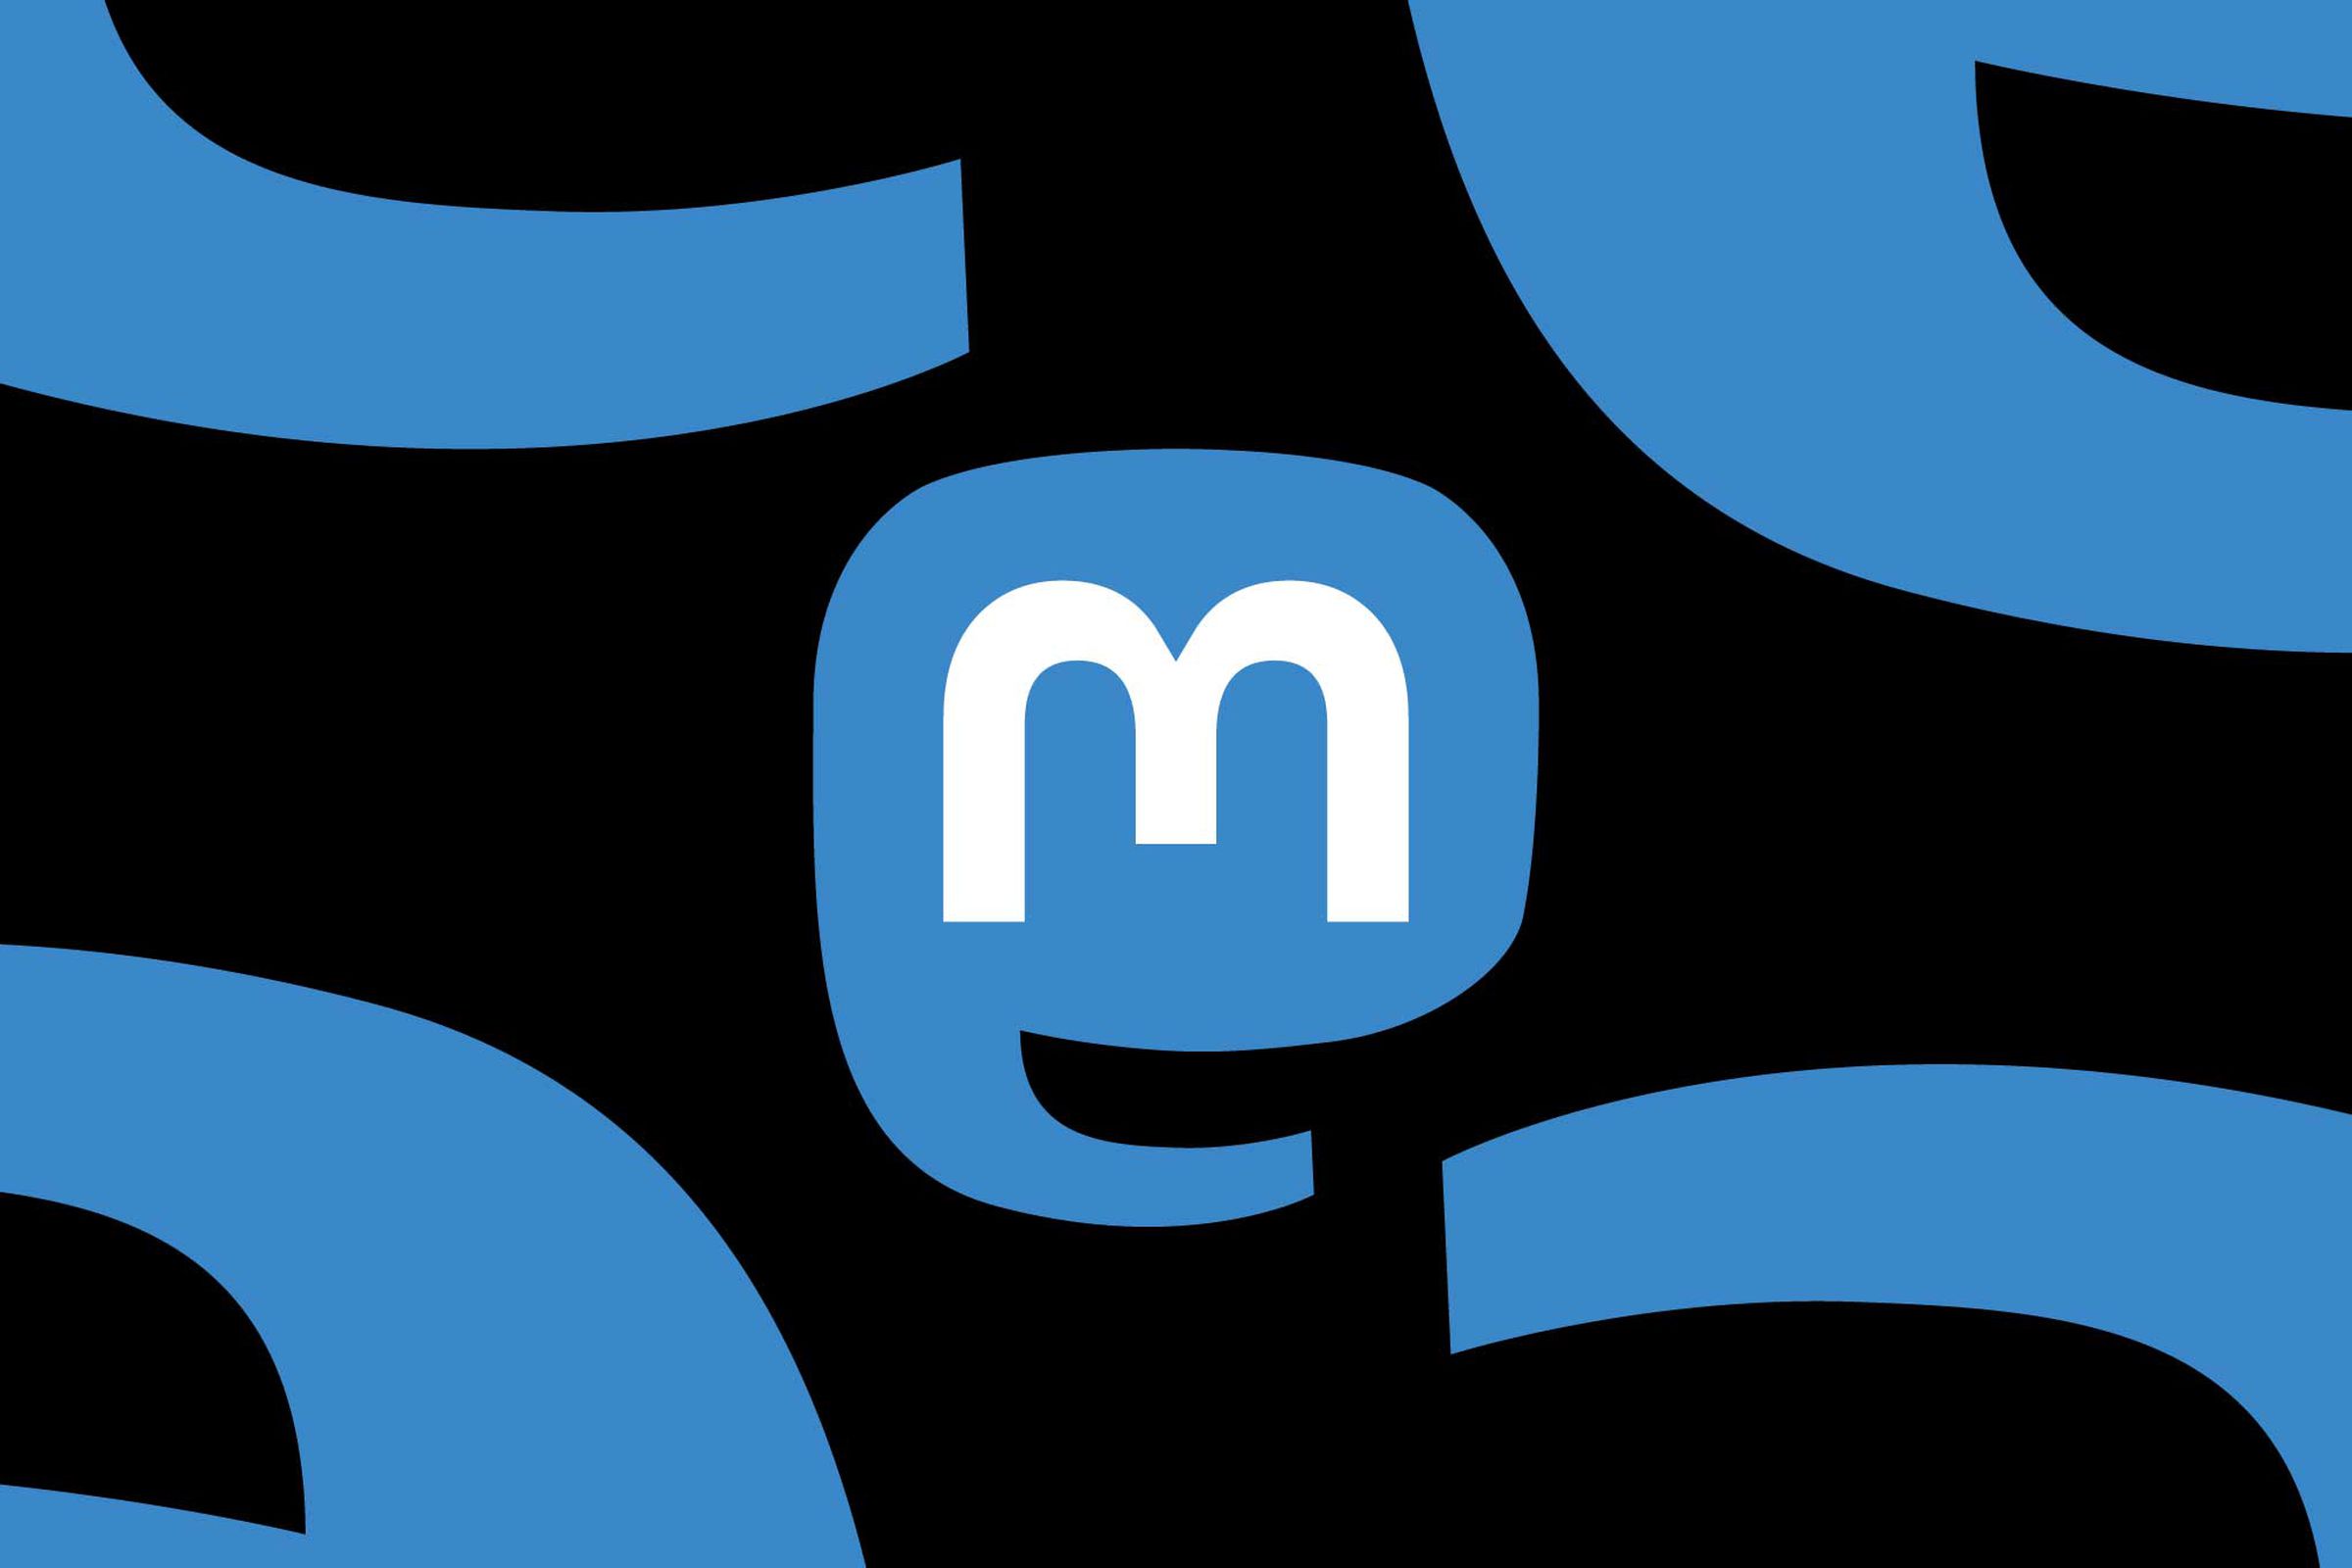 An image showing the Mastodon logo on a black background